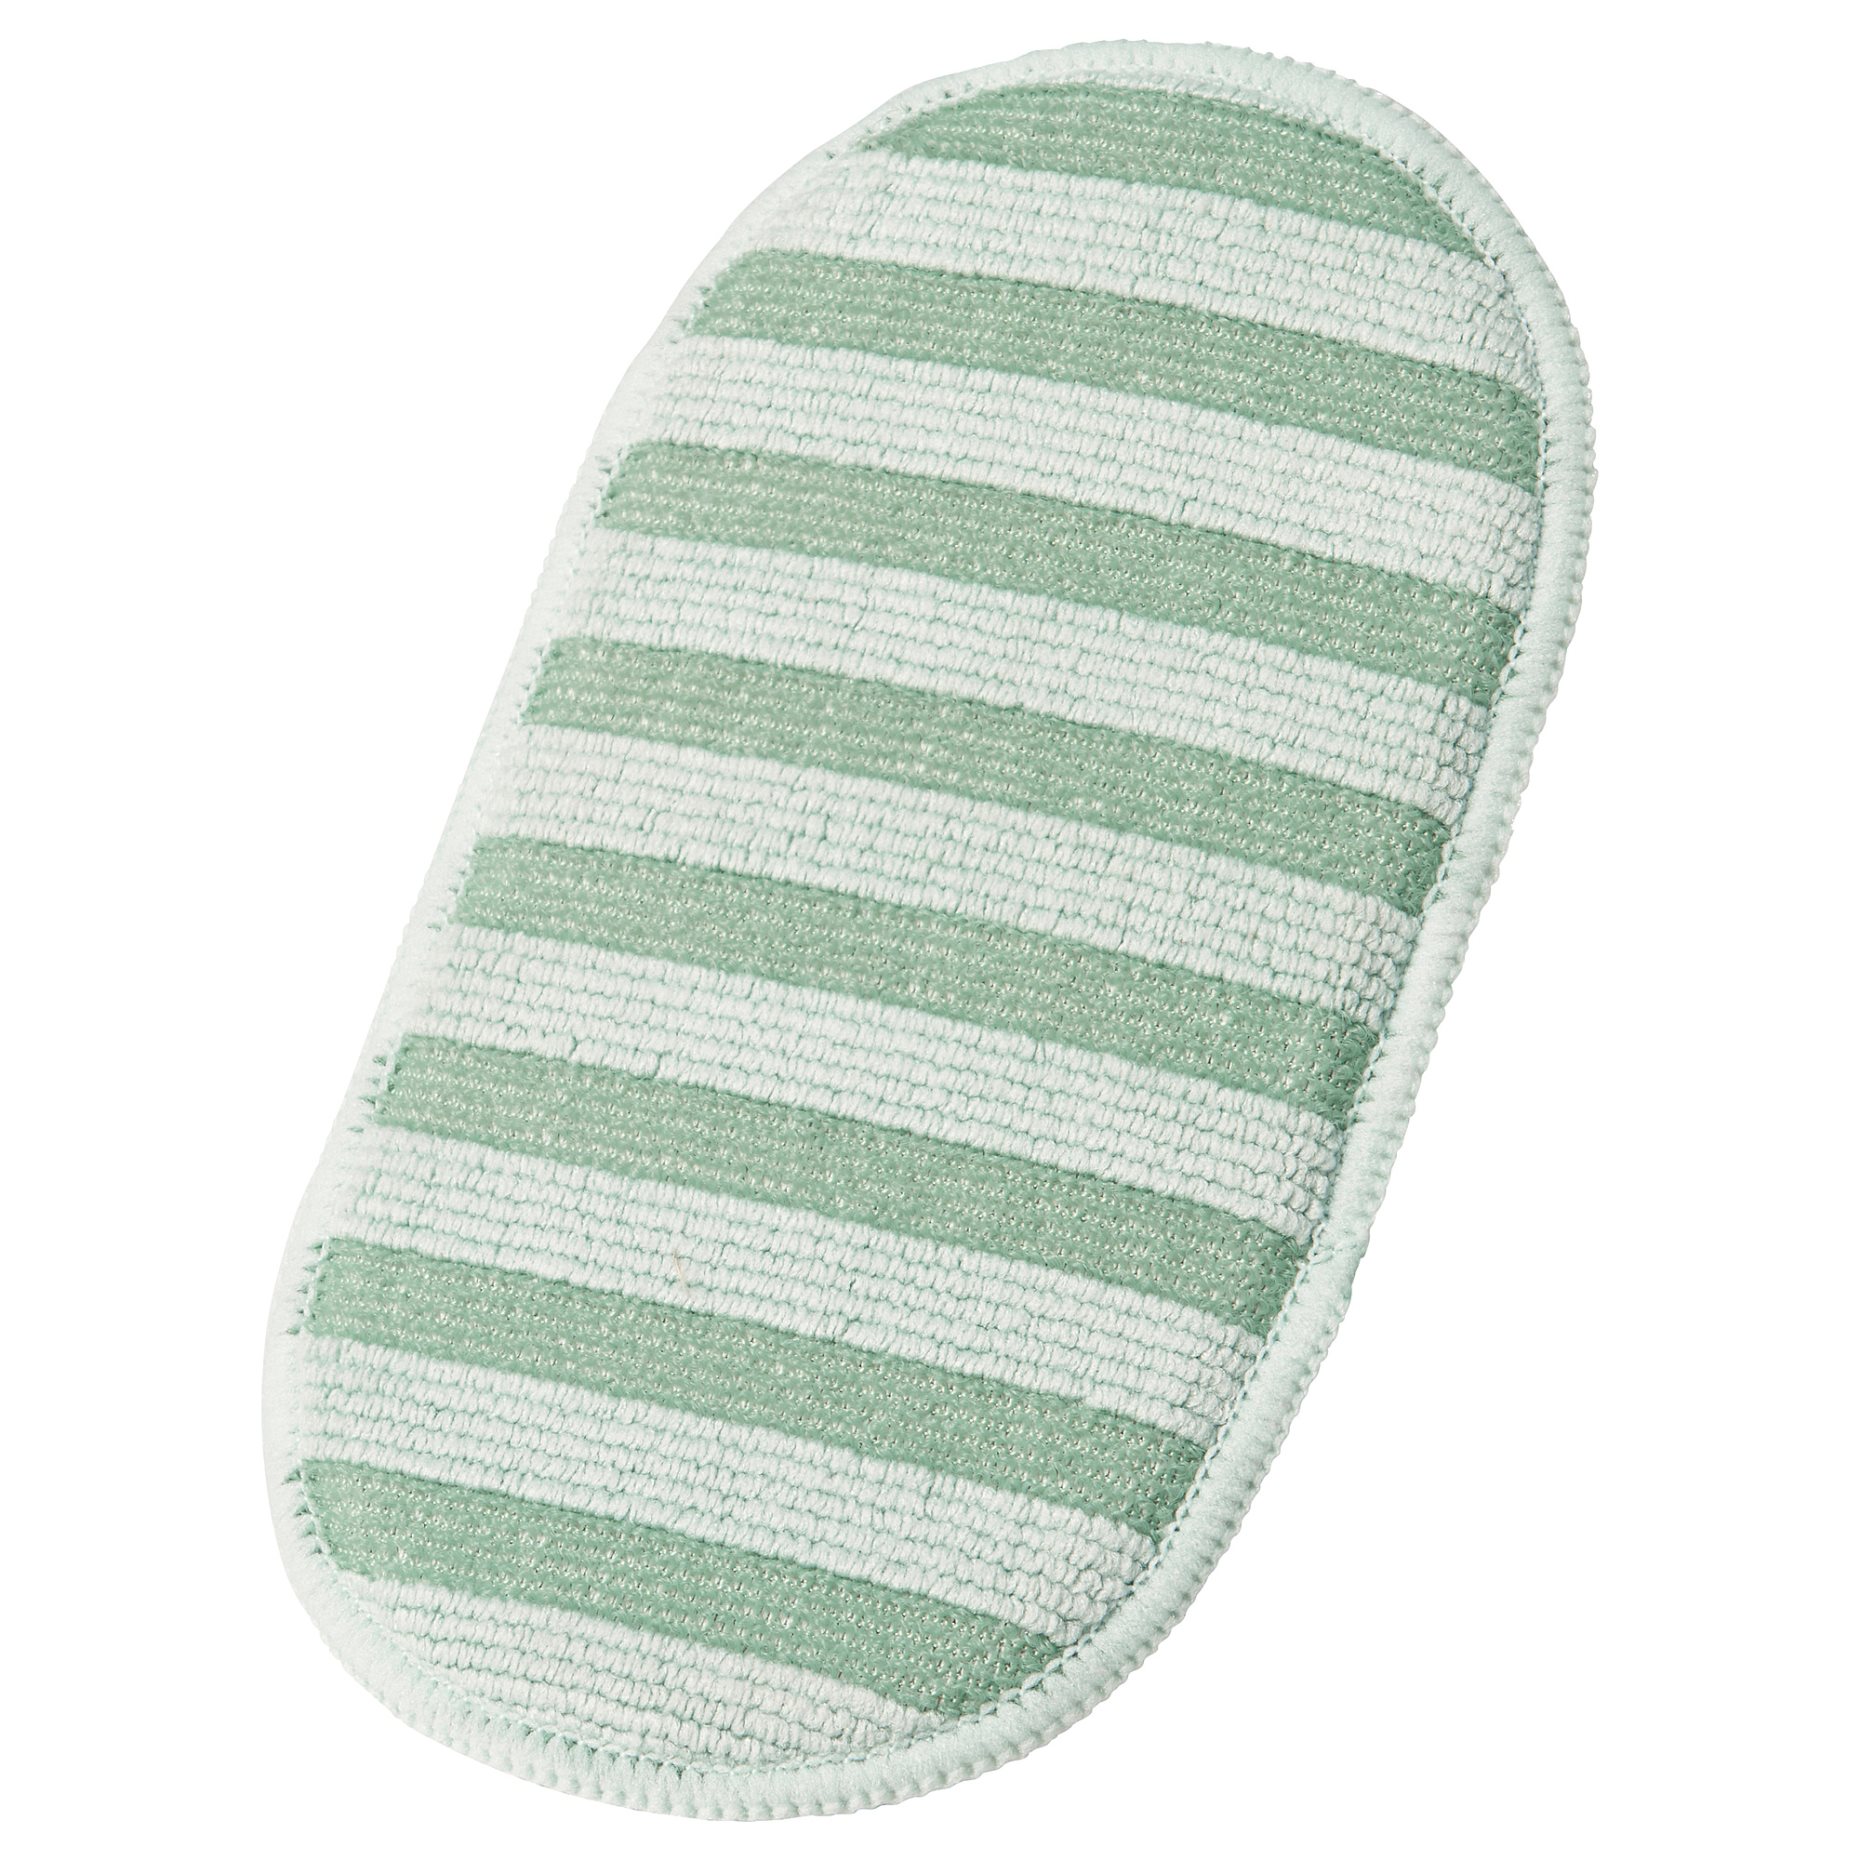 PEPPRIG, microfibre cleaning pad, 605.676.41